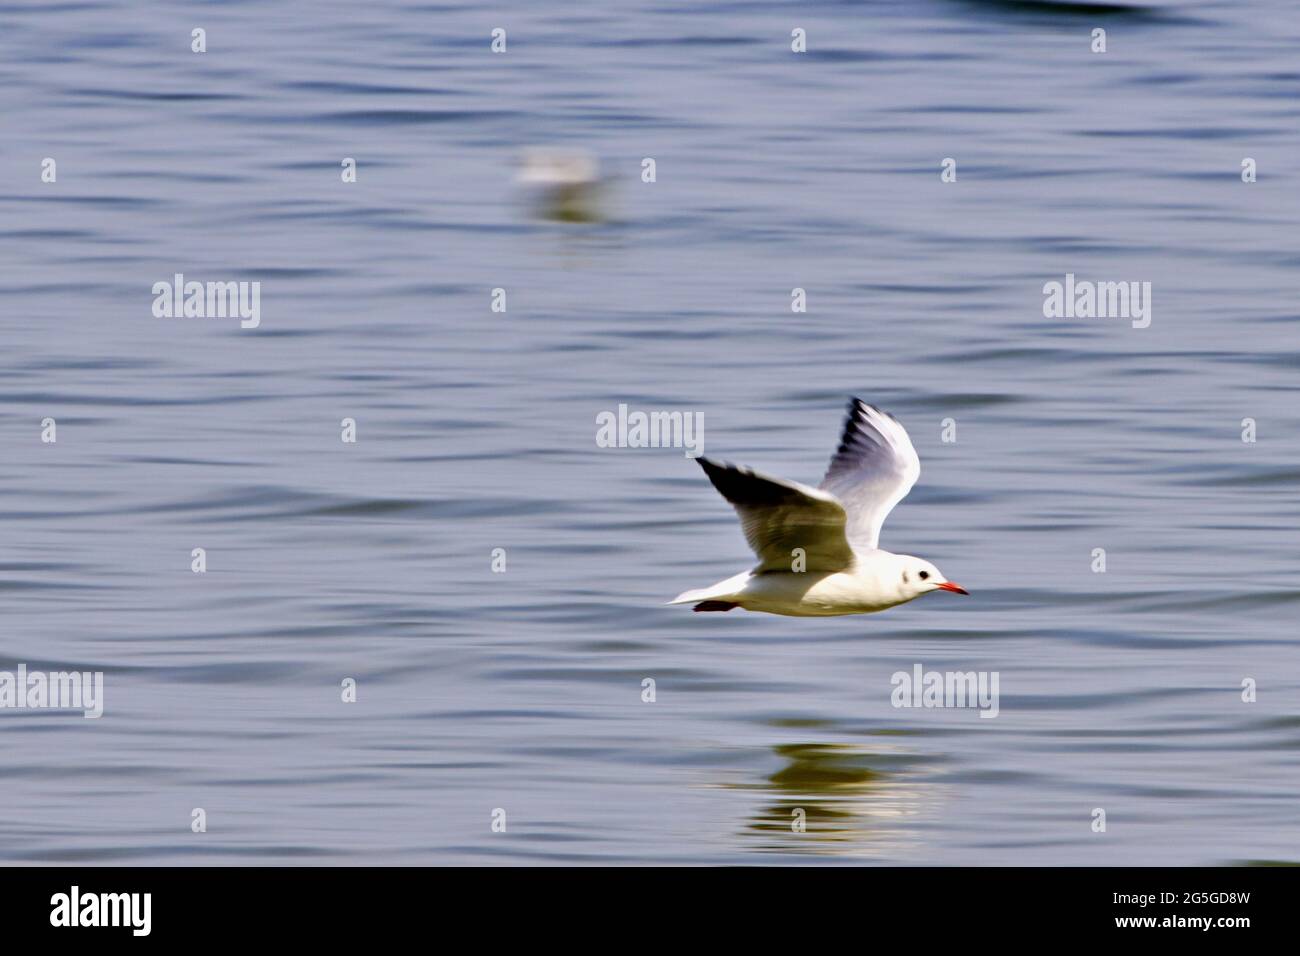 Seagull flying over open water Stock Photo